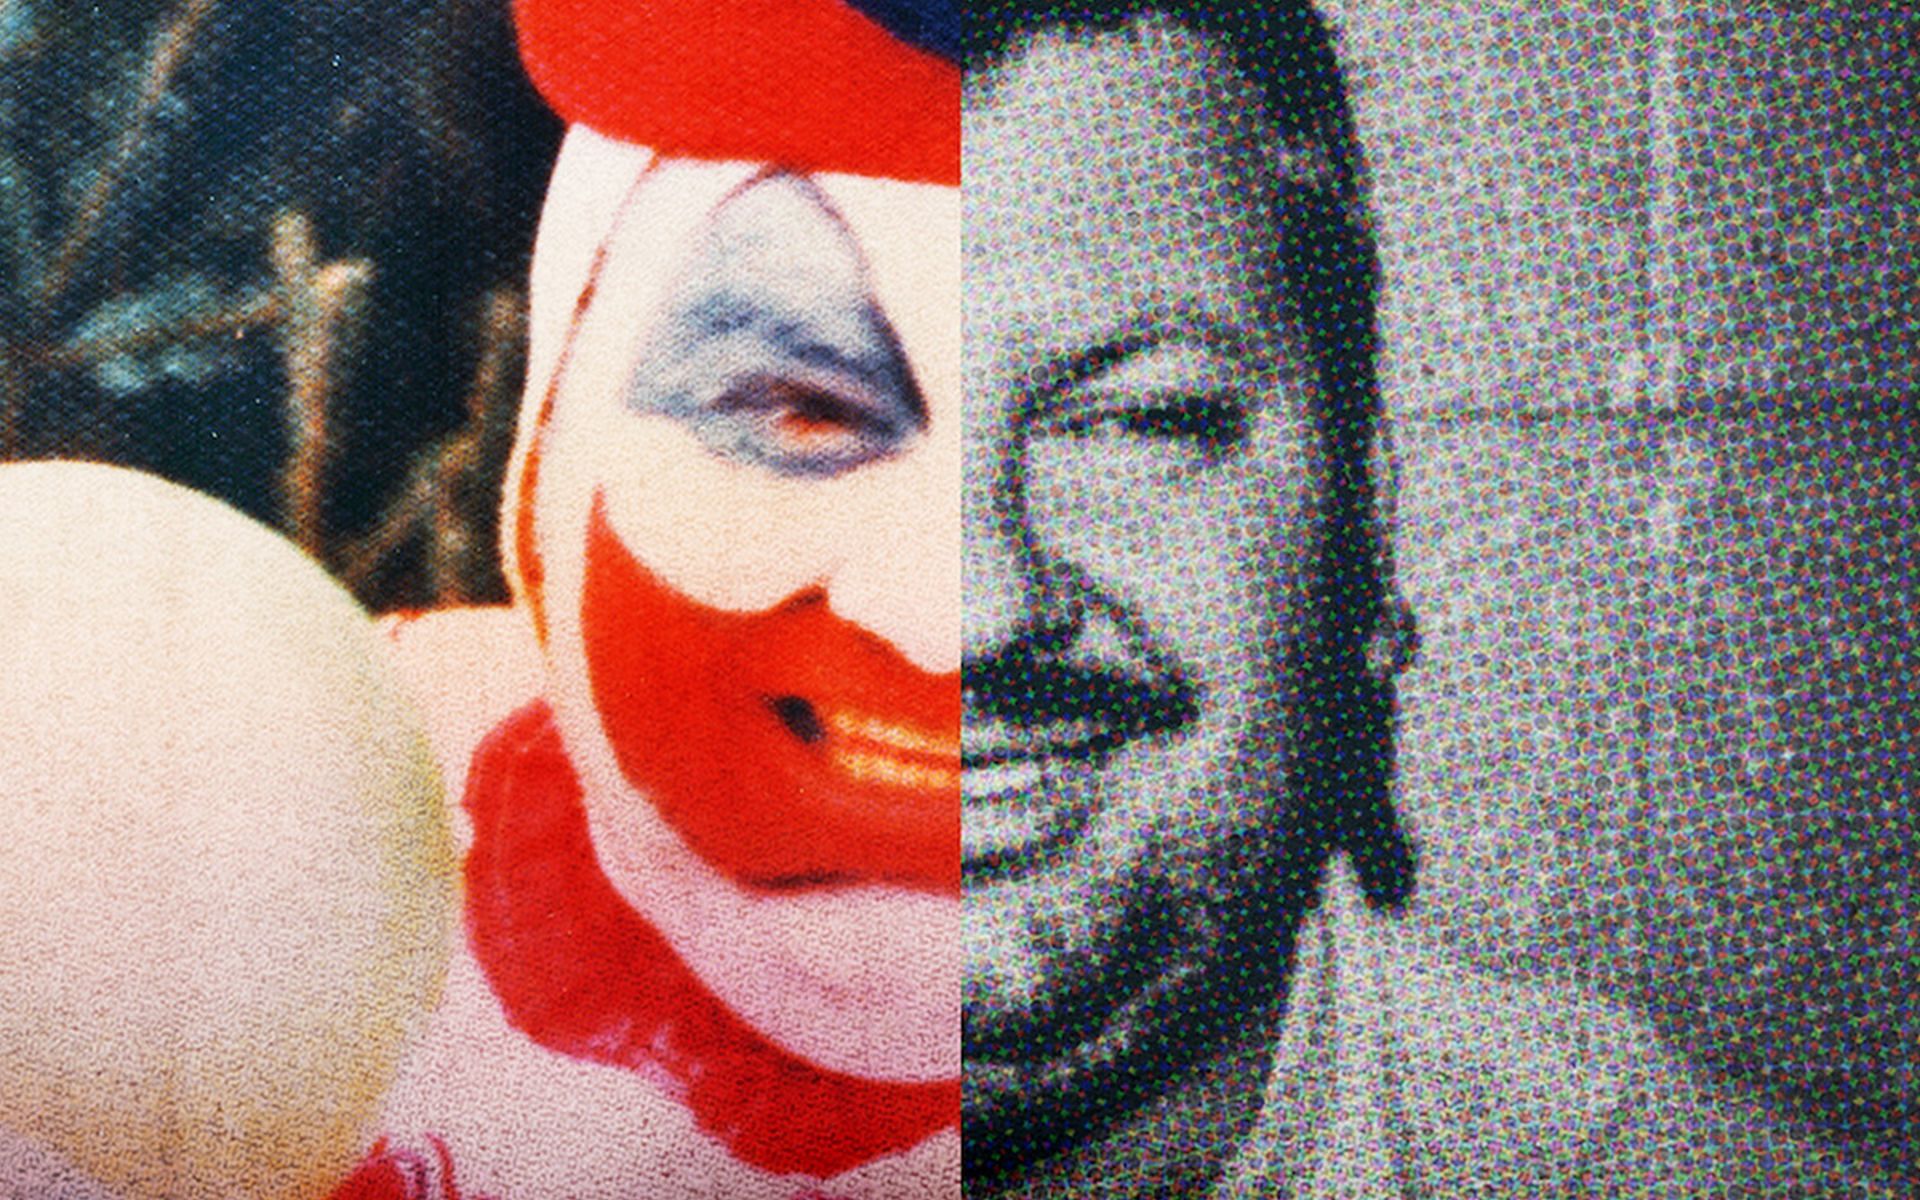 Conversations With a Killer: The John Wayne Gacy Tapes promotional picture (Image via Netflix)